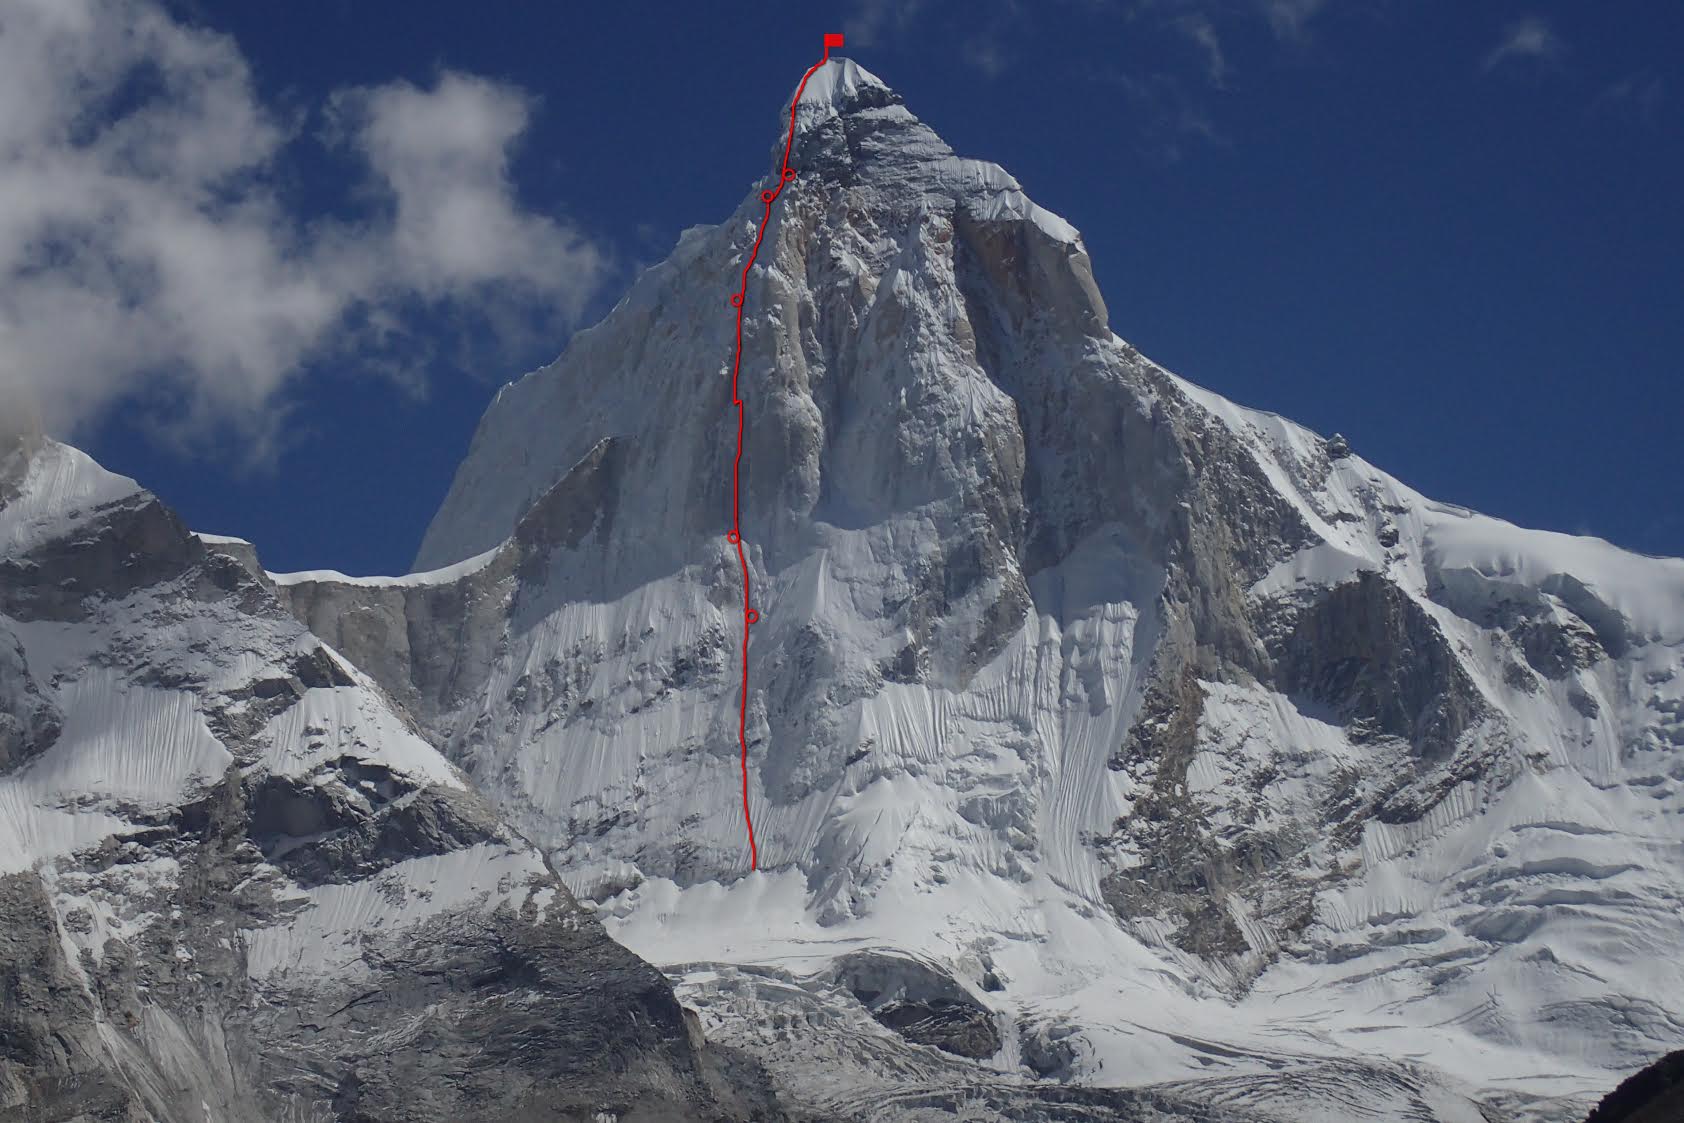 The red line marks the route and camps of Moveable Feast (ED2: M7 WI5 5.10a A3, 1400m) on Thalay Sagar (6904m), India. [Photo] Courtesy of Dmitry Golovchenko and Mountain.RU.